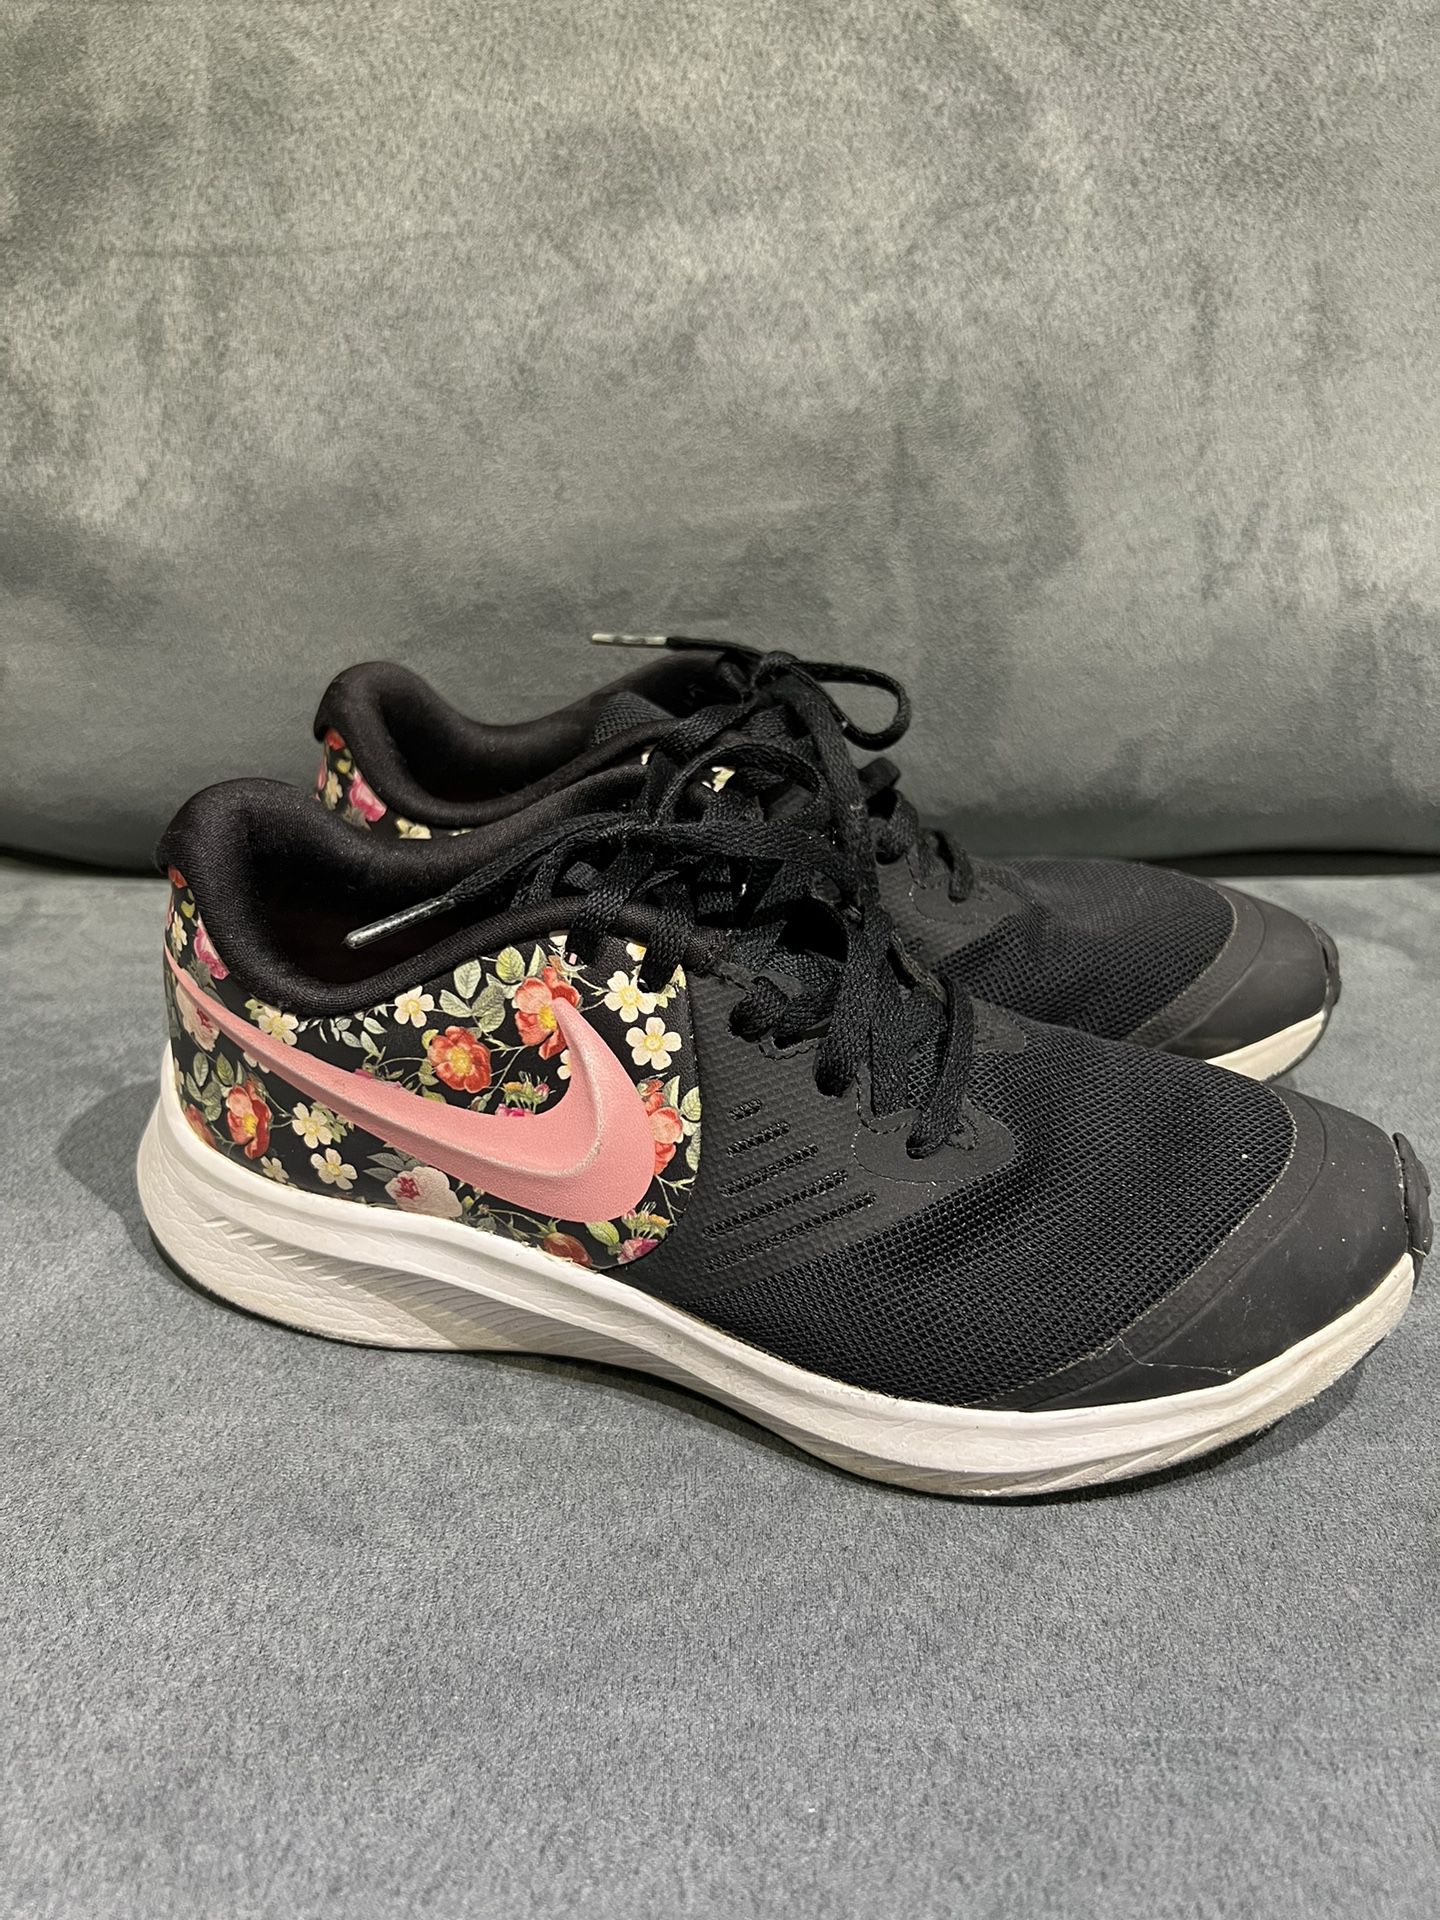 Nike Runner floral 4Y for Sale in Eastchester, NY - OfferUp